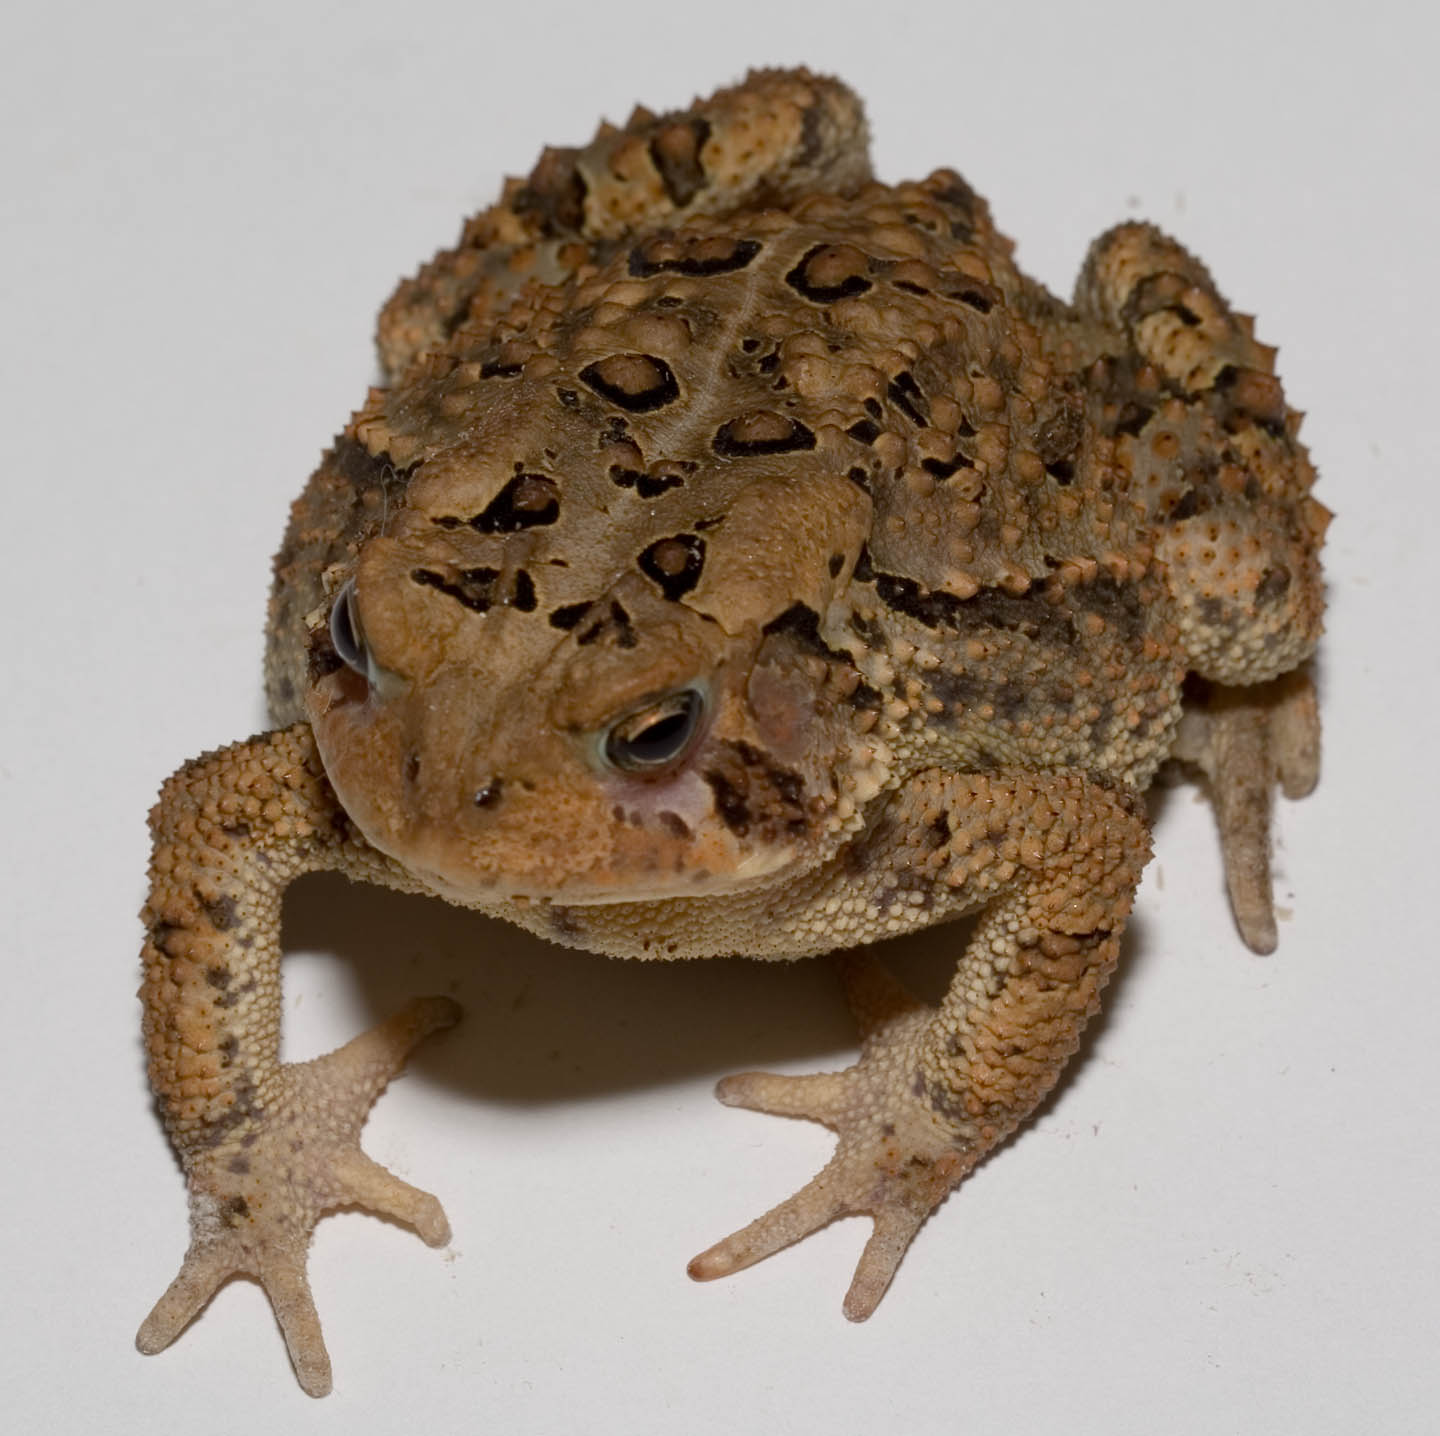 Toad on a piece of white paper